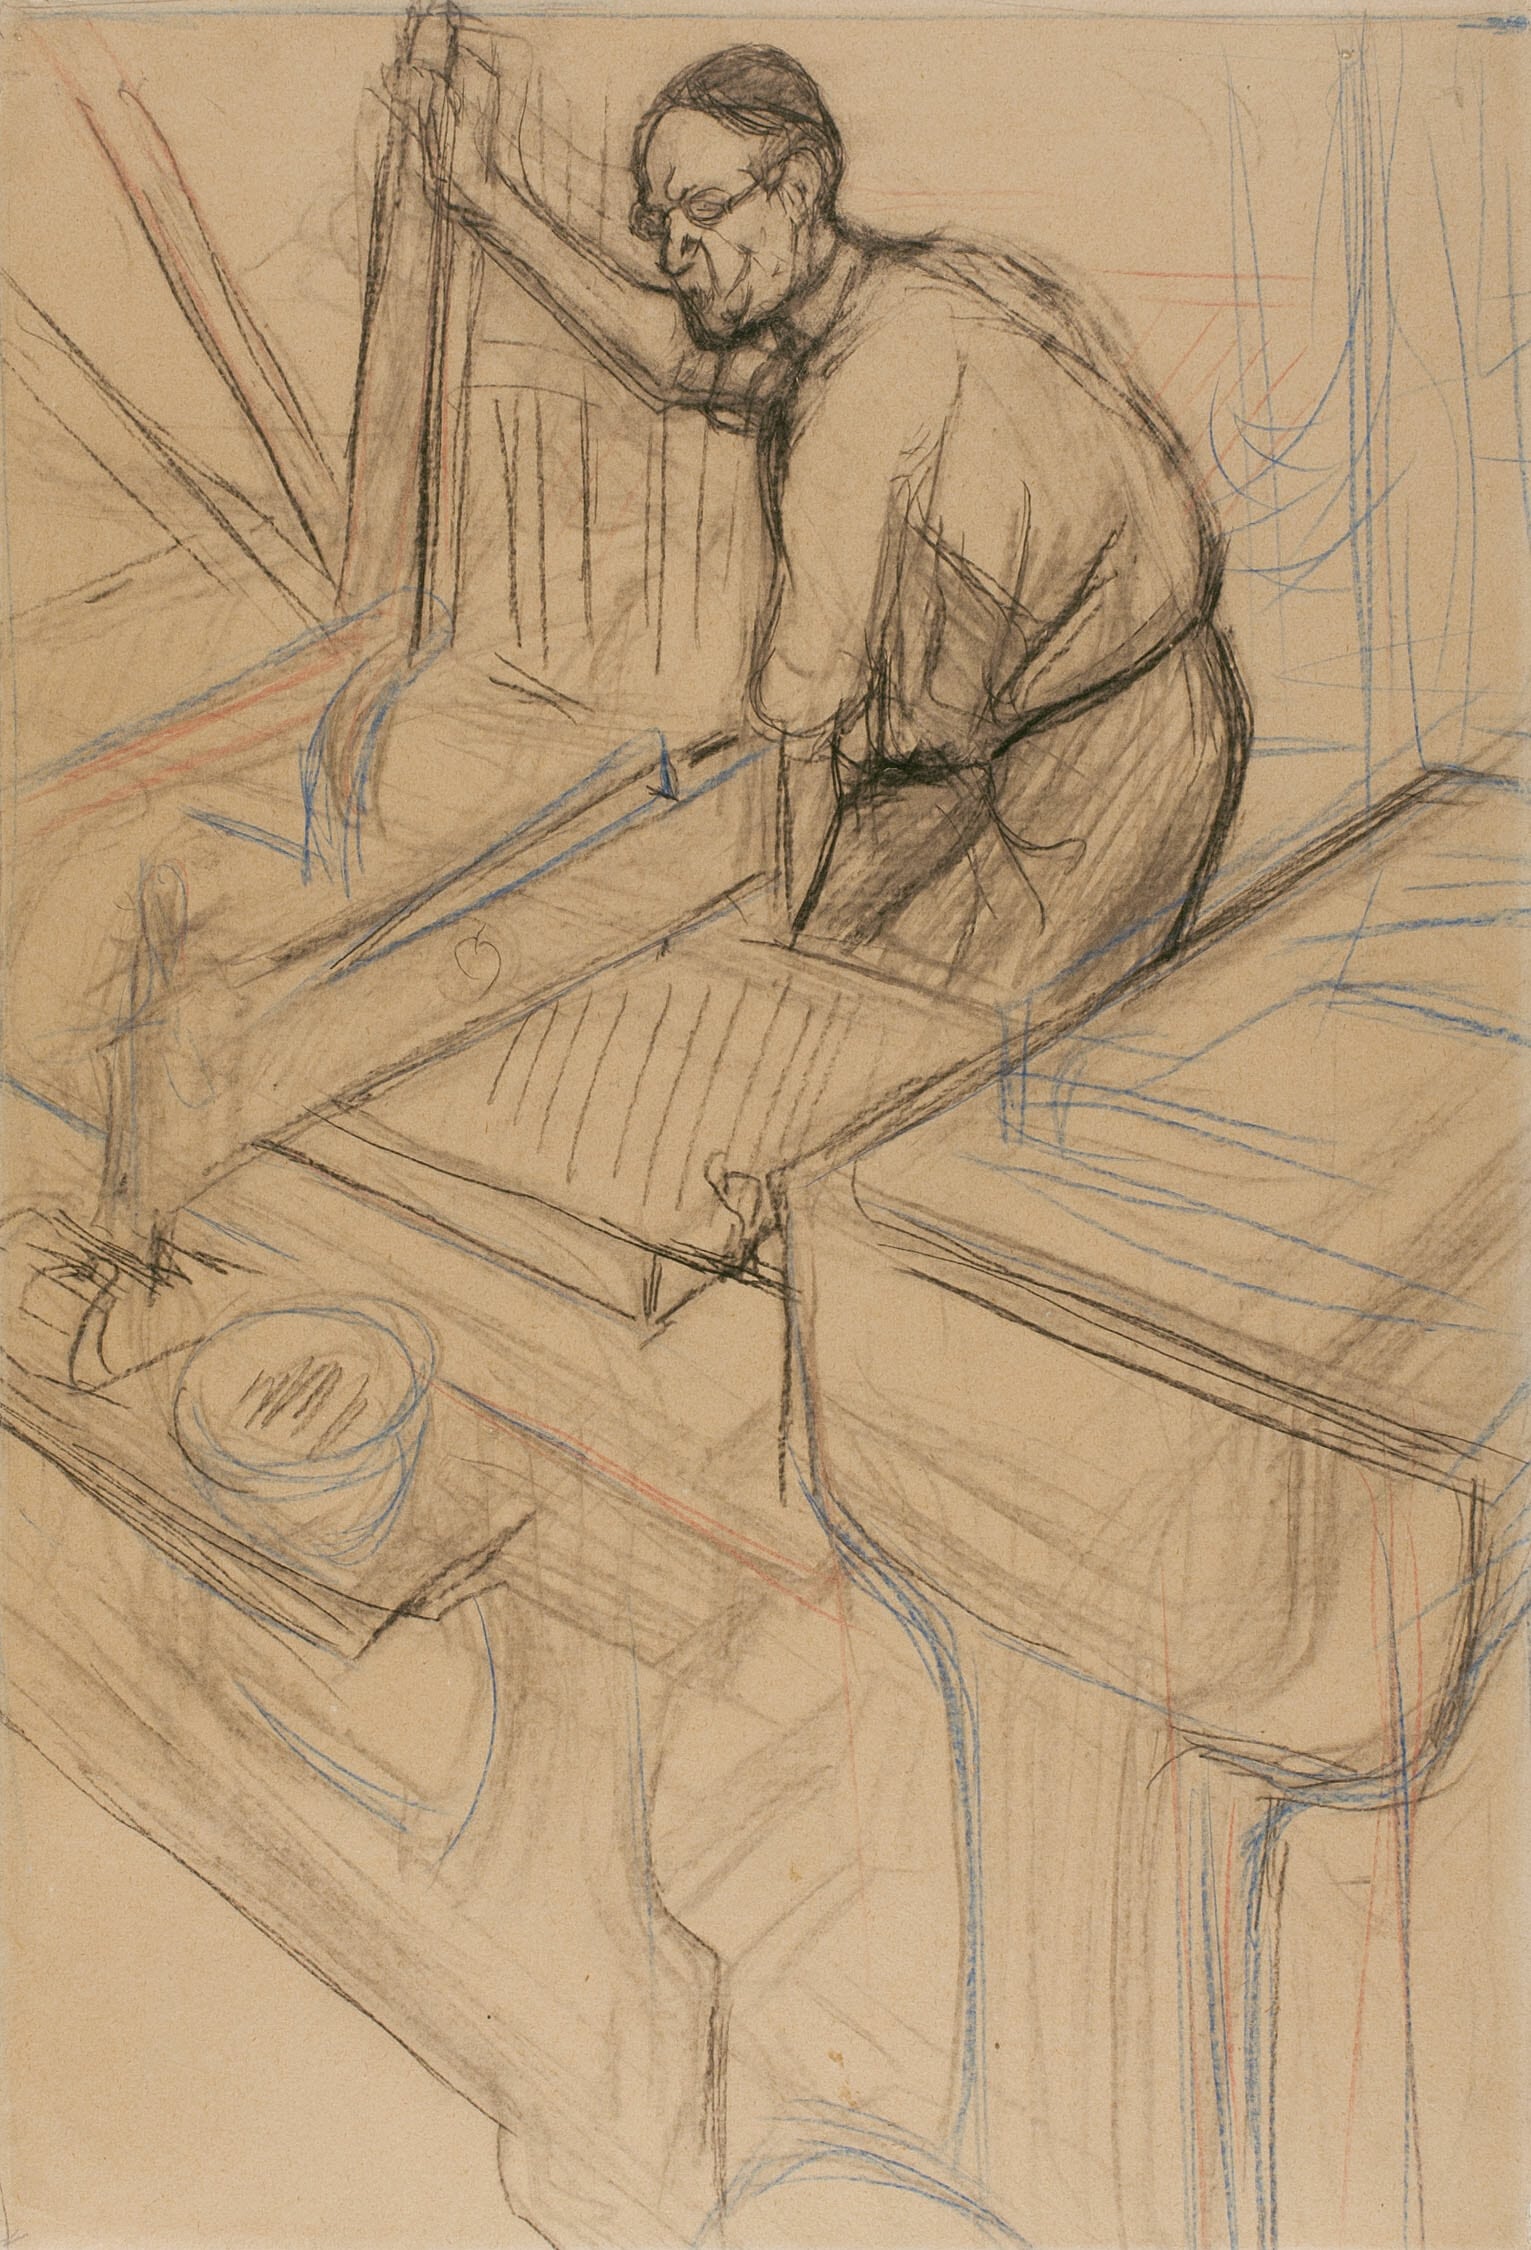 Here Lautrec depicted his favorite printmaker, Père Cotelle, pulling on the lever of the star wheel, which moved the lithographic stone through the press.